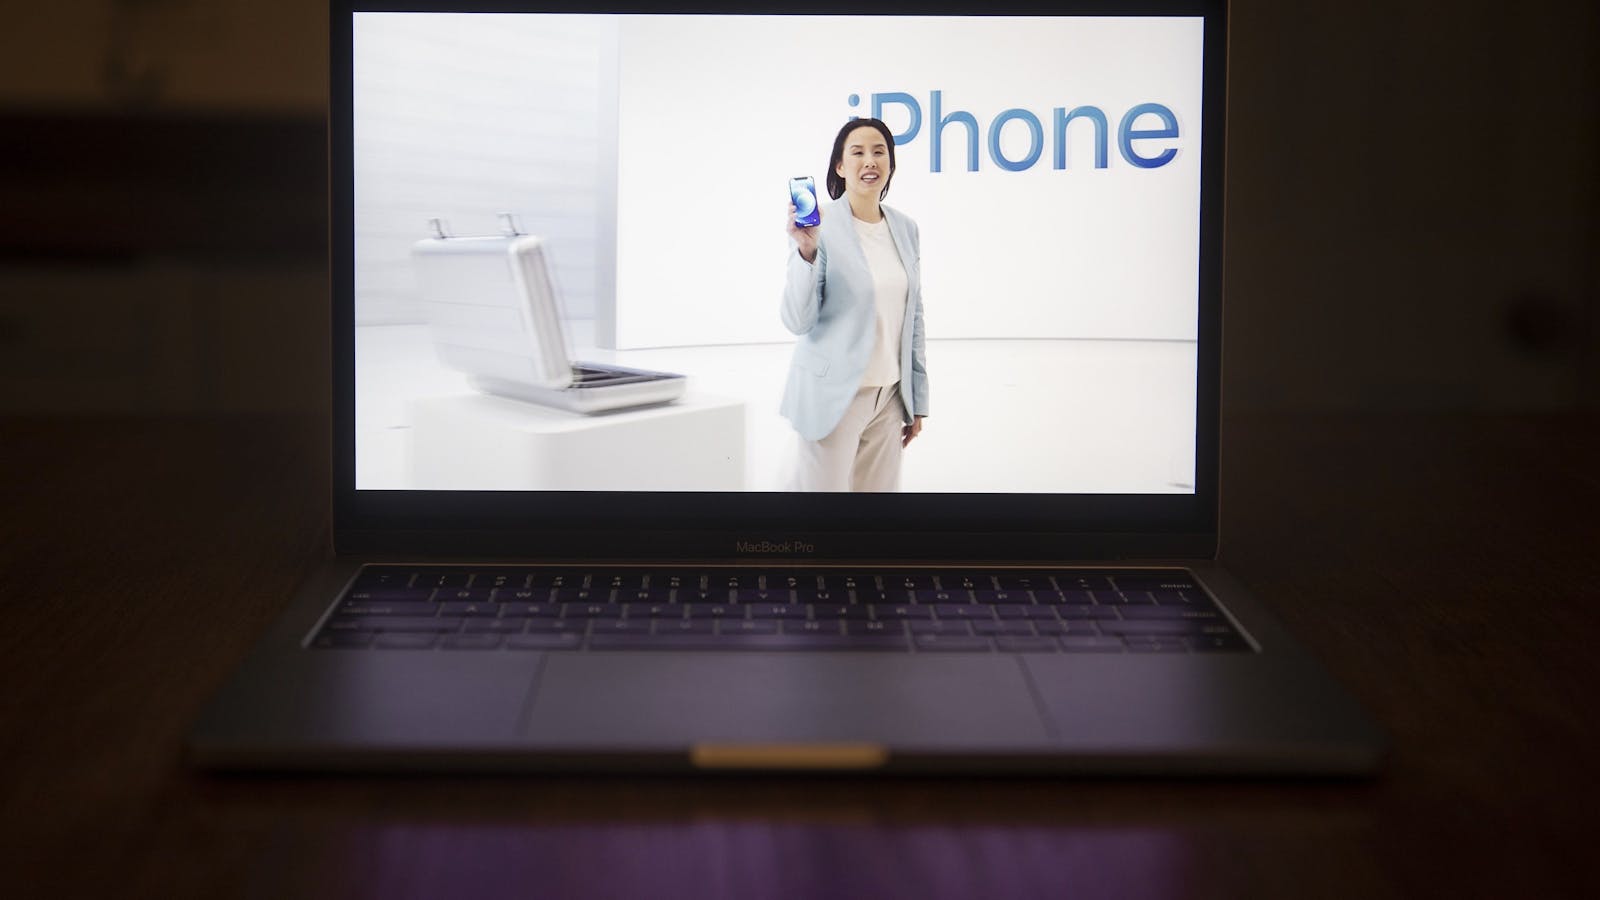 Kaianne Drance, vice president of iPhone product marketing at Apple Inc., showing off one of Apple's new iPhones on Tuesday. Photo by Bloomberg